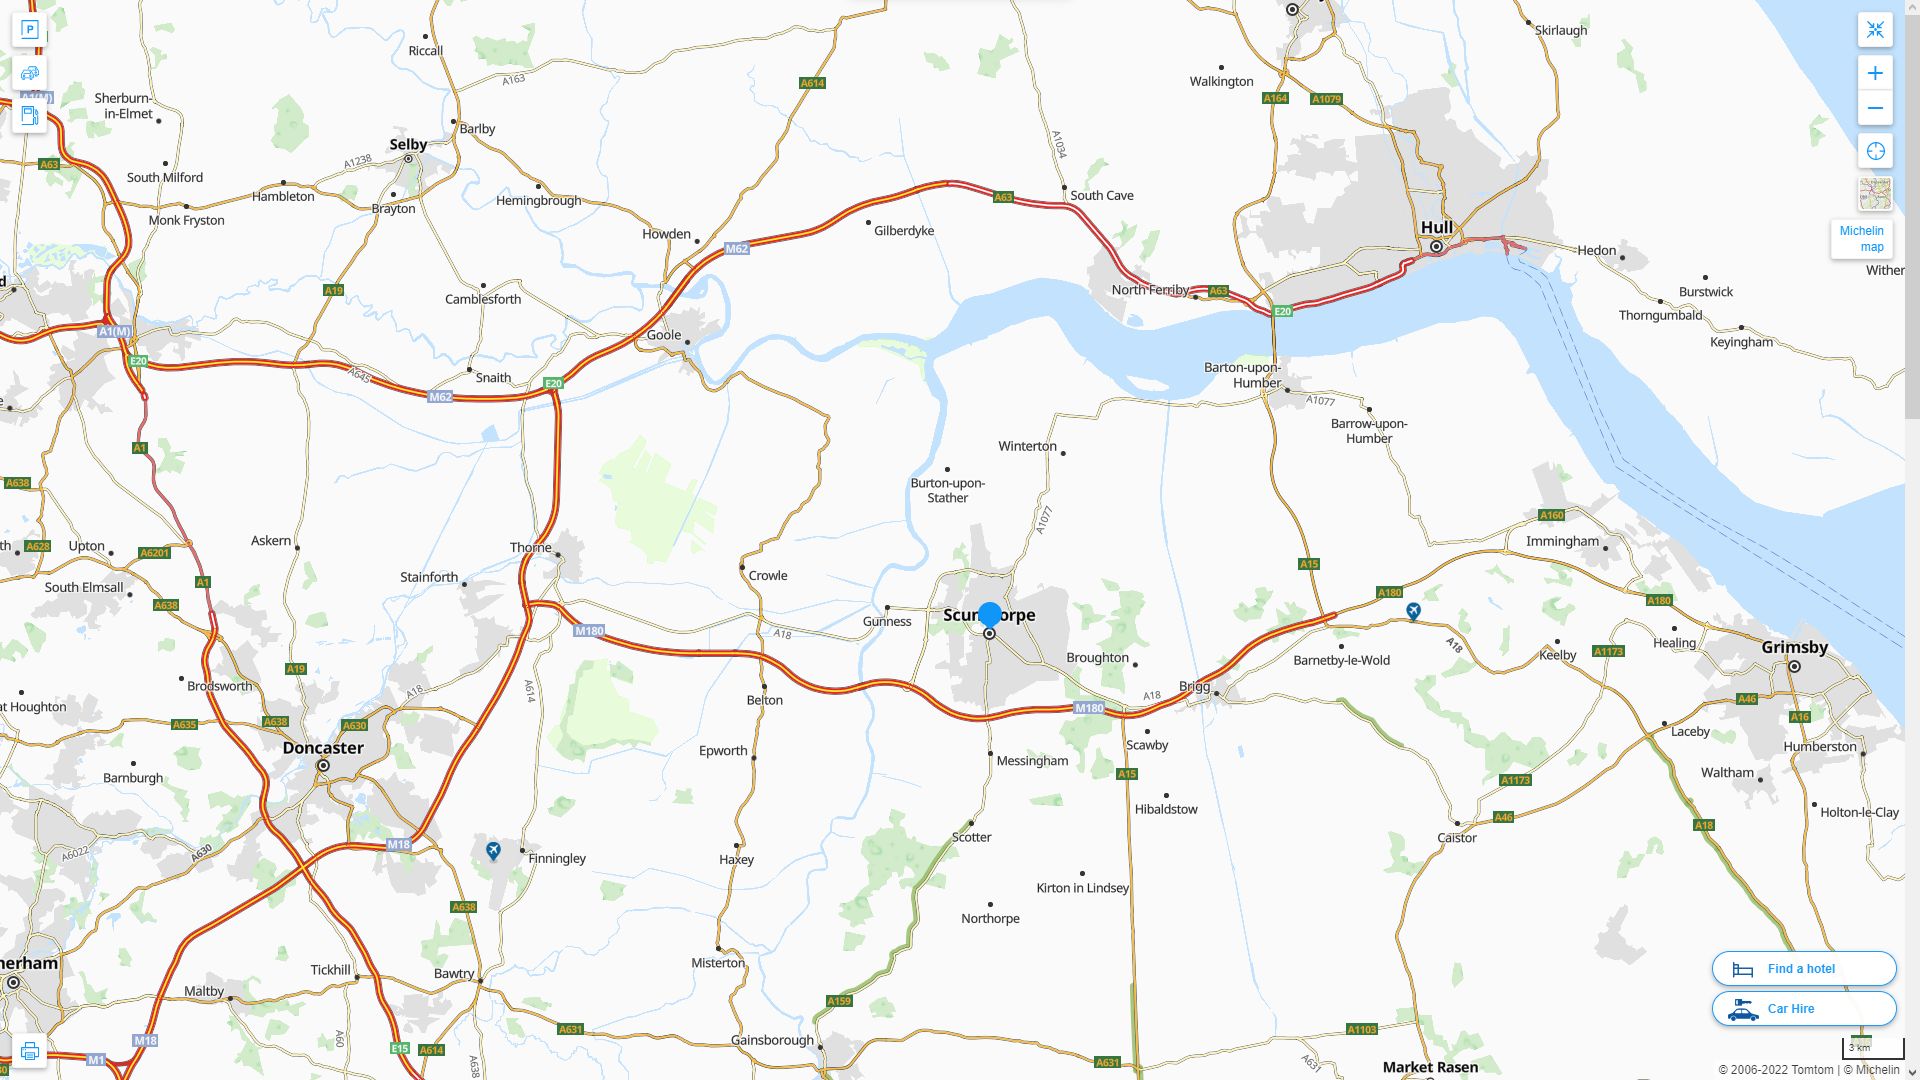 Scunthorpe Highway and Road Map